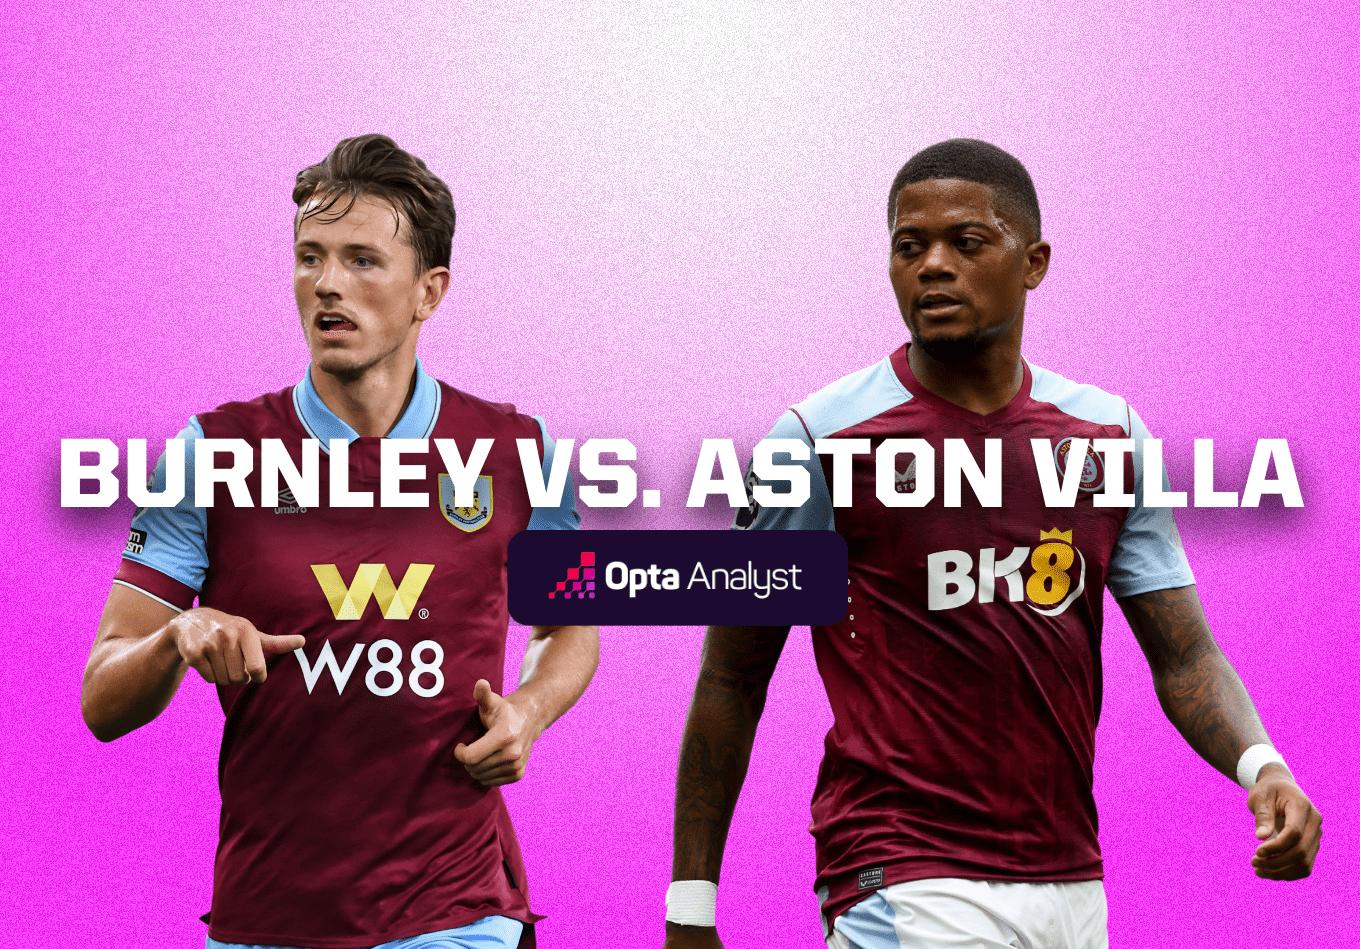 Burnley vs Aston Villa: Prediction and Preview | The Analyst